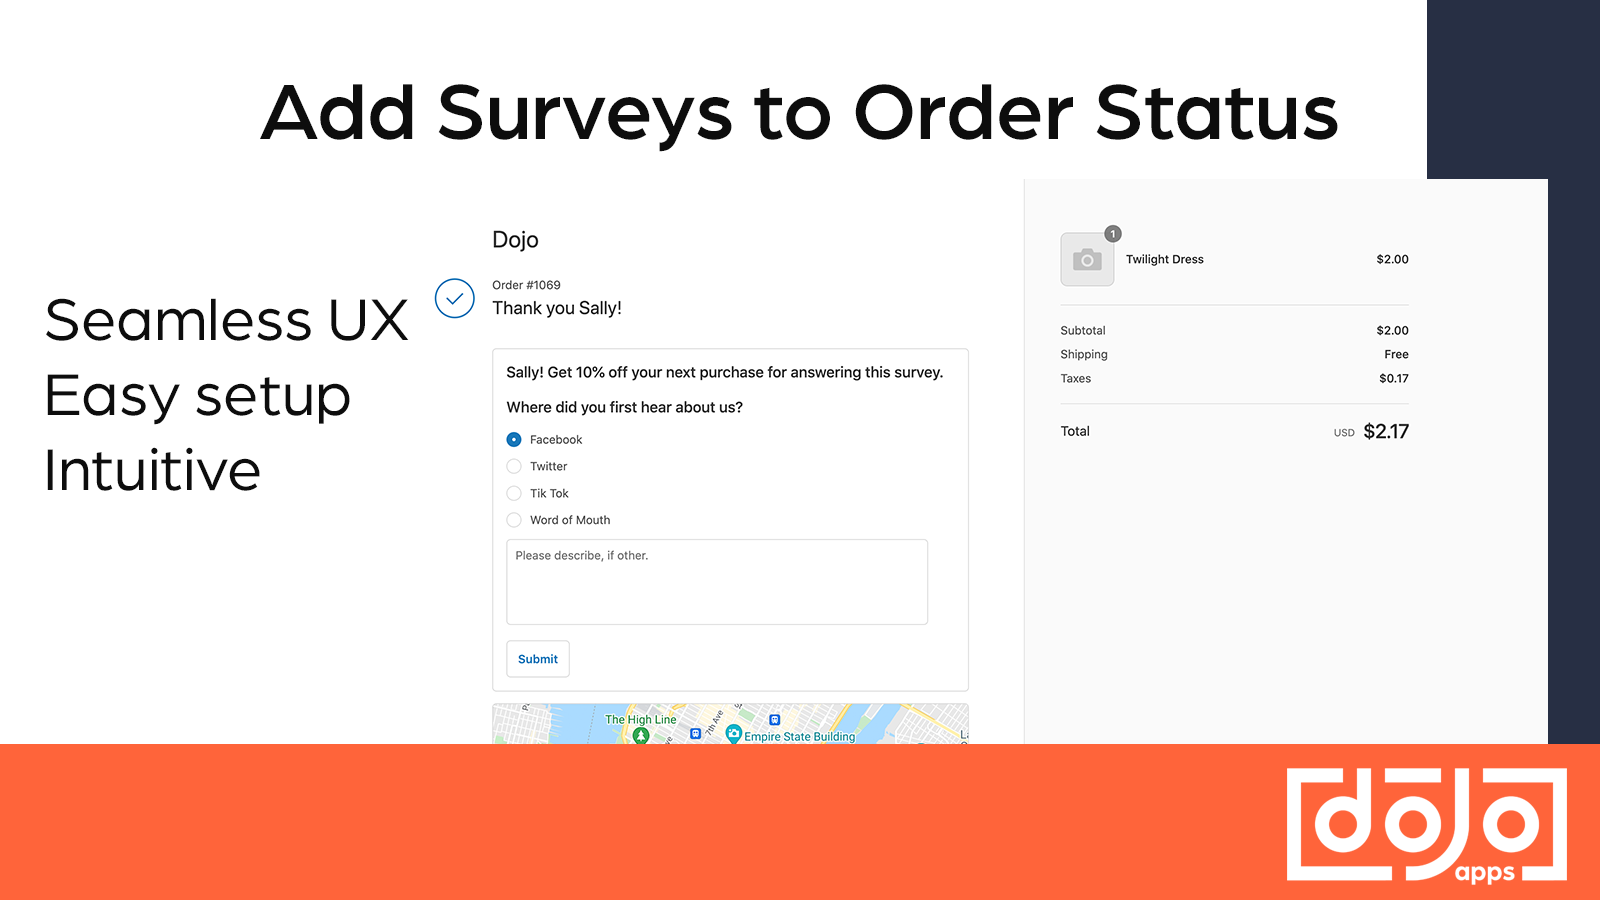 Post purchase surveys appear seamlessly at the end of orders